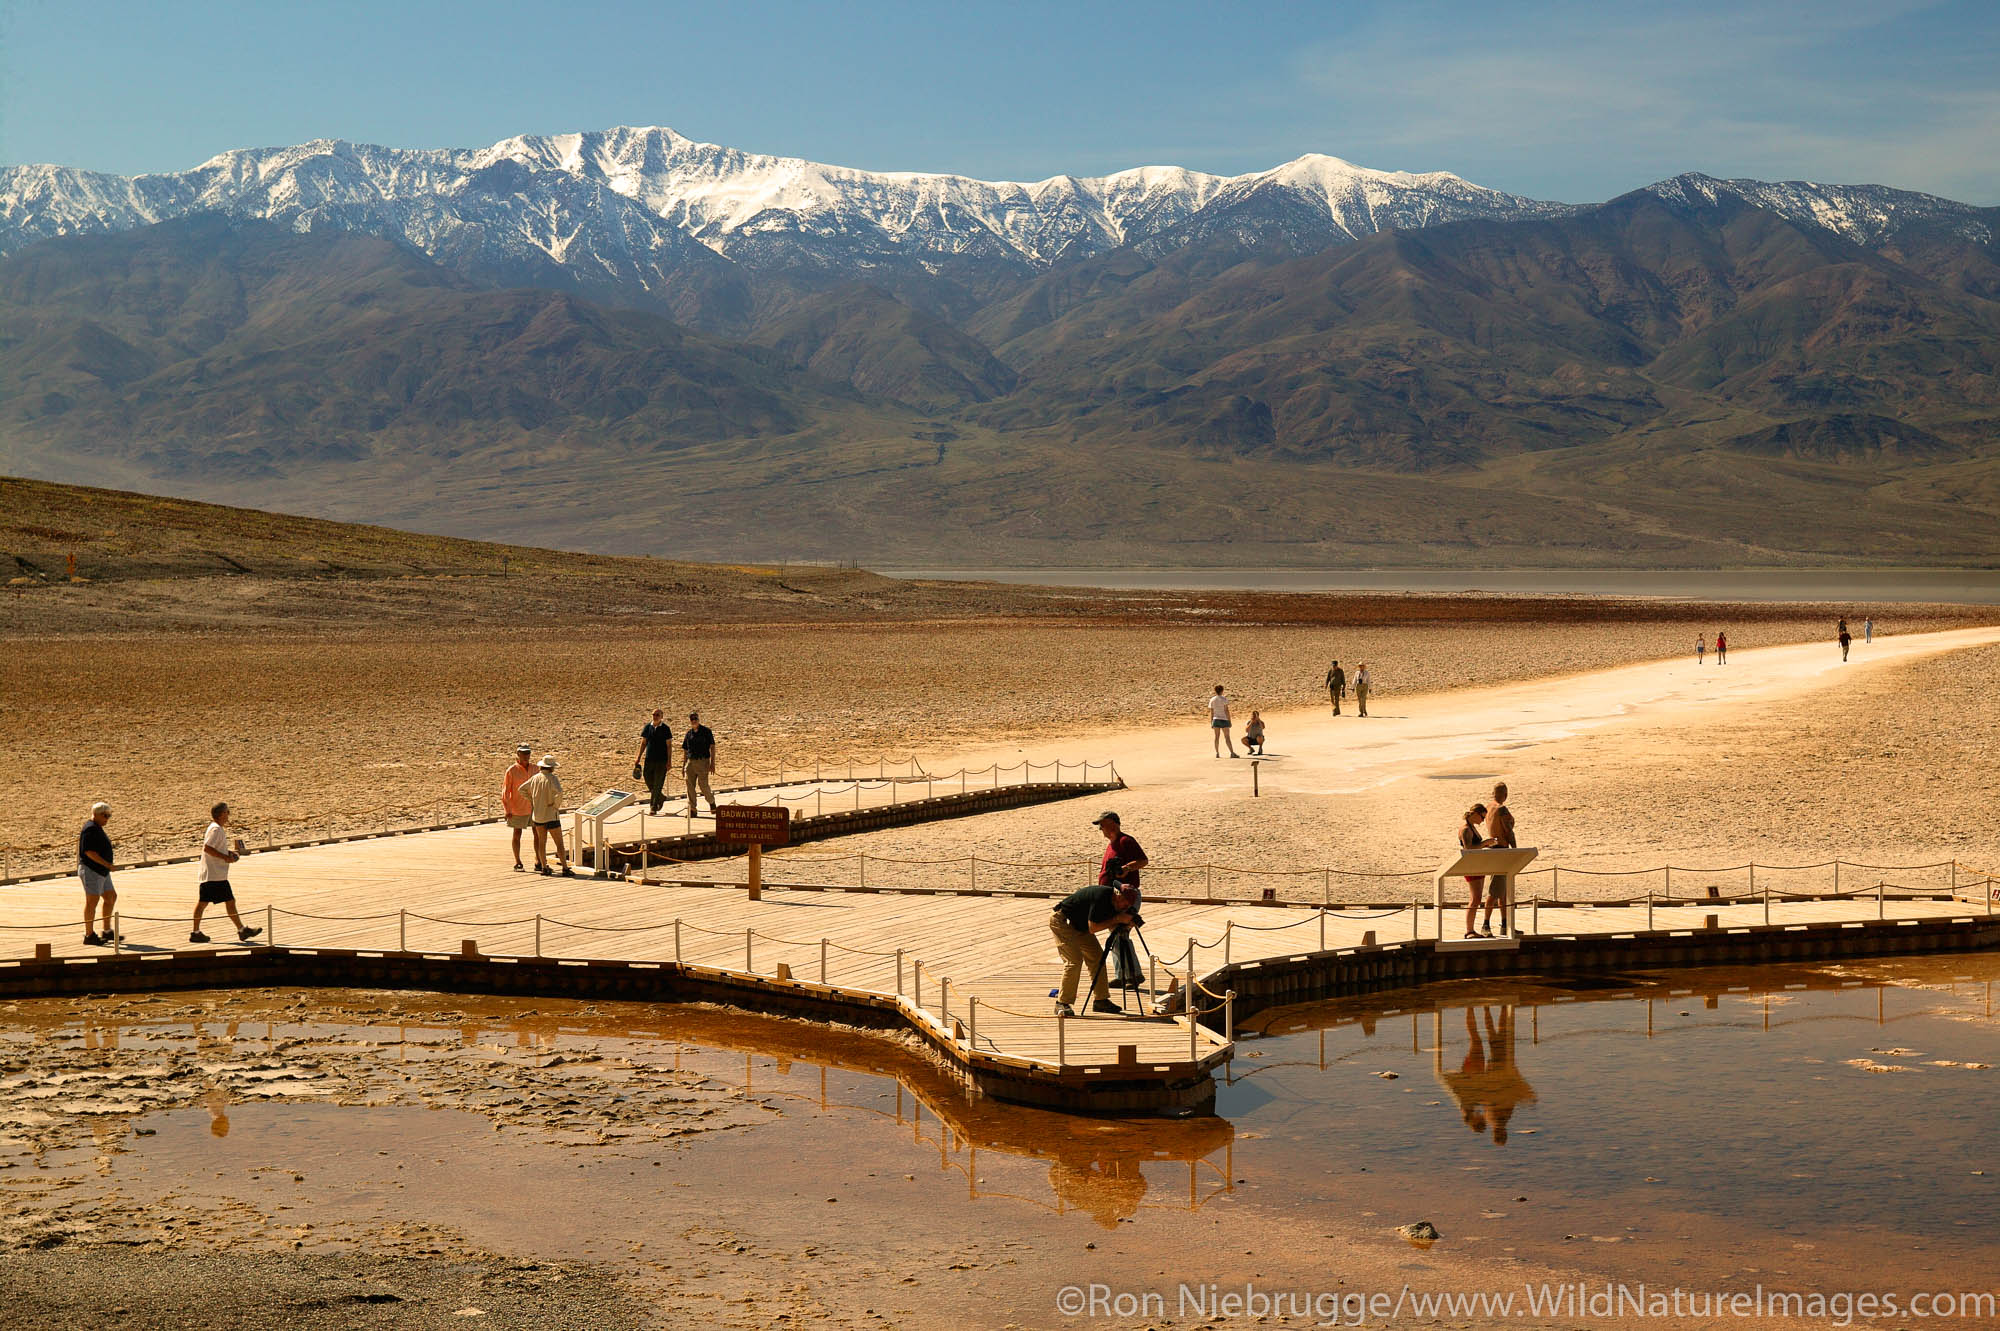 Water from heavy rains fill the Badwater Basin into a lake in 2005.  Death Valley National Park, California.